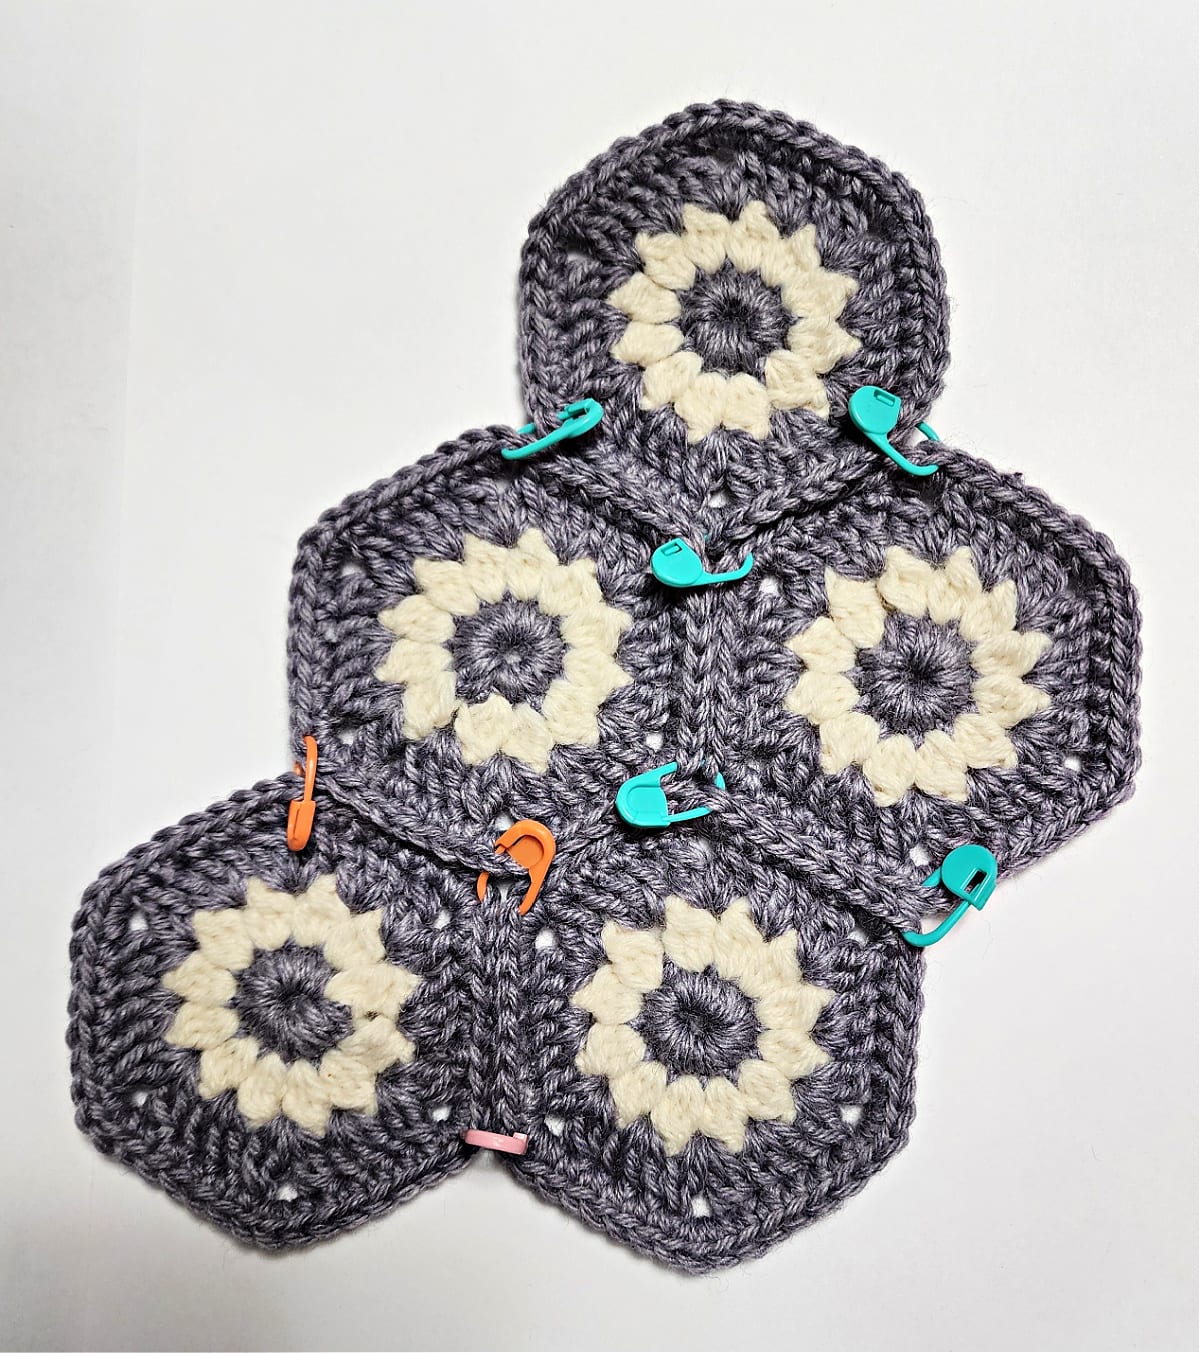 Crochet hexagons held together with stitch markers before seaming.